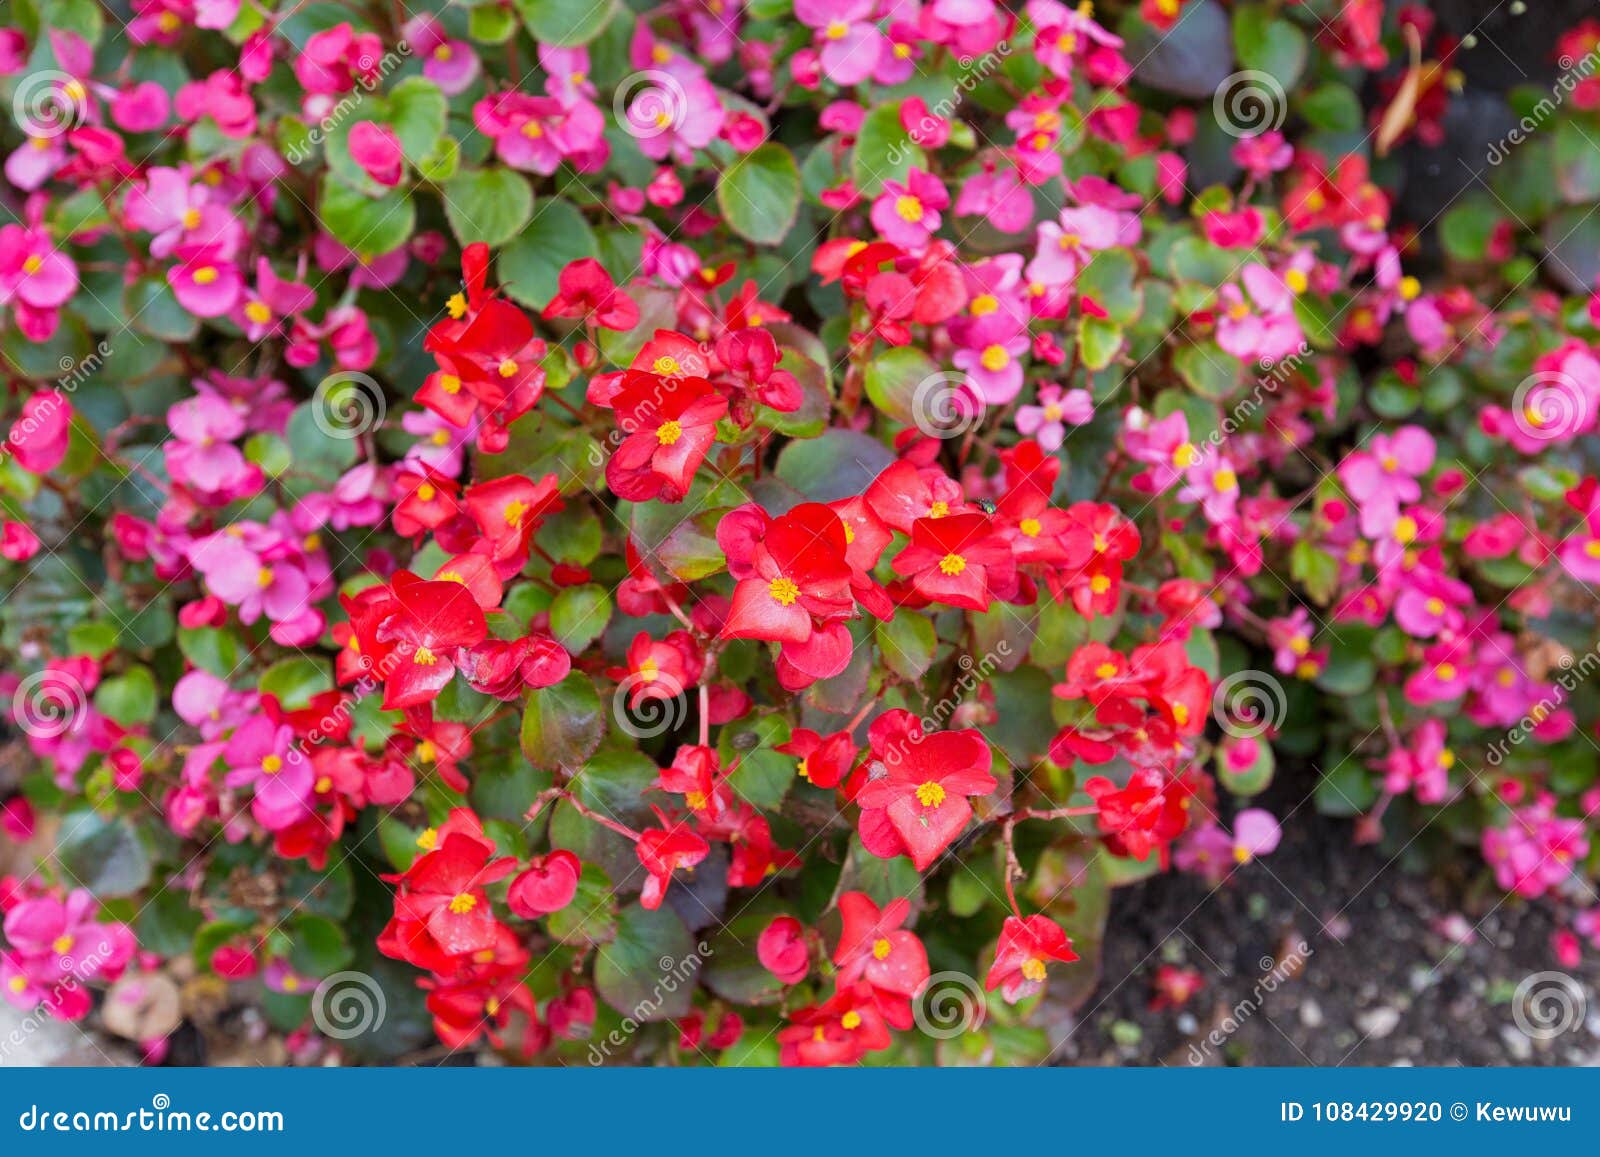 ax begonia flower in pink red with yellow stamen blossoming in g